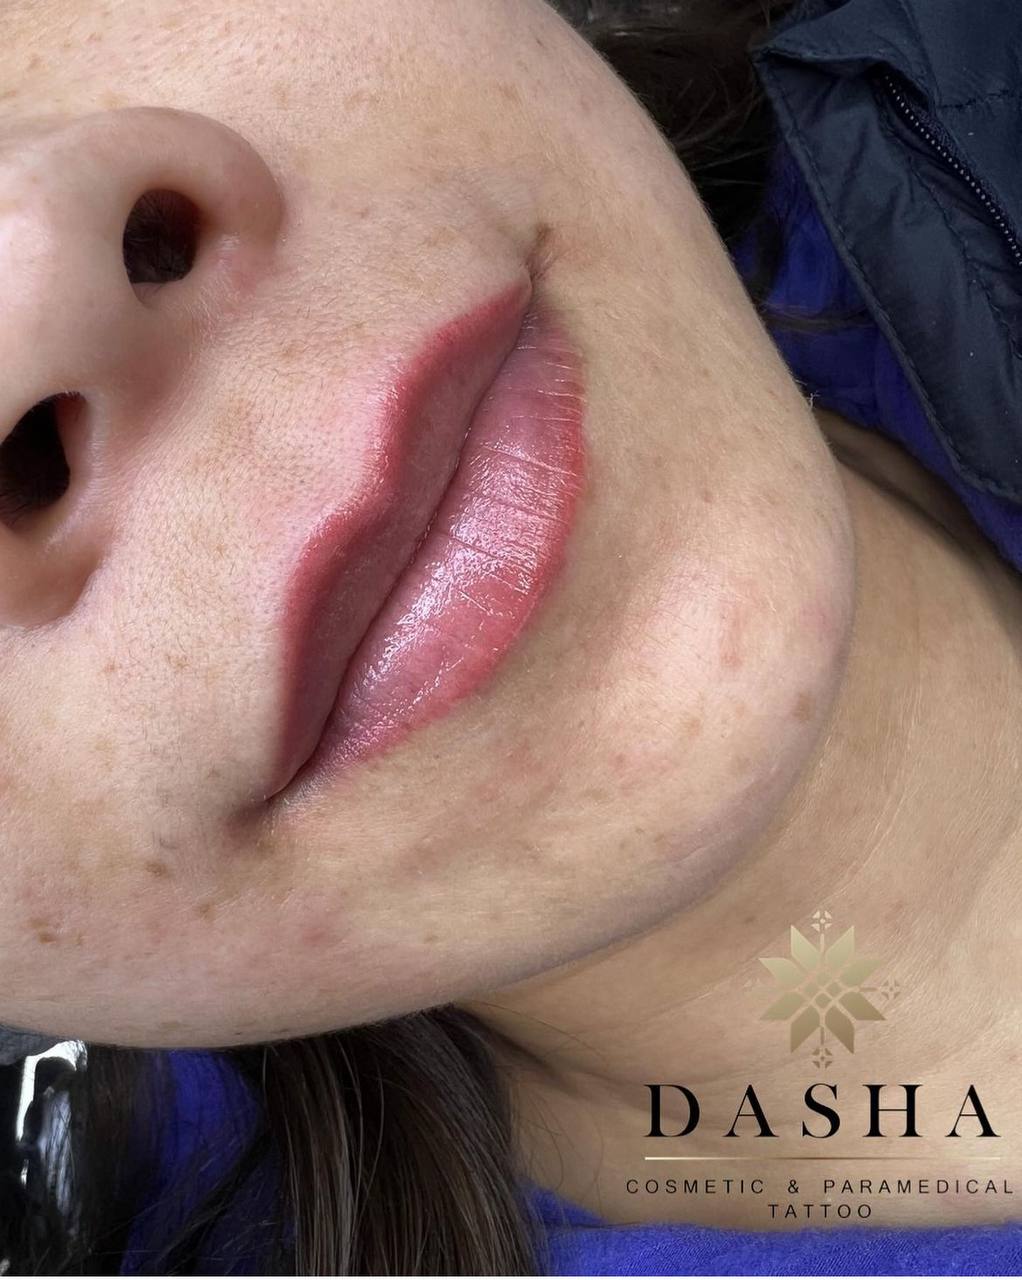 LIp Outline Cosmetic Tattoo. Cosmetic and Mediical Tattoo by Dasha. Permanent makeup and reconstructive tattoo, scalp micro-pigmentation in Christchurch, New Zealand